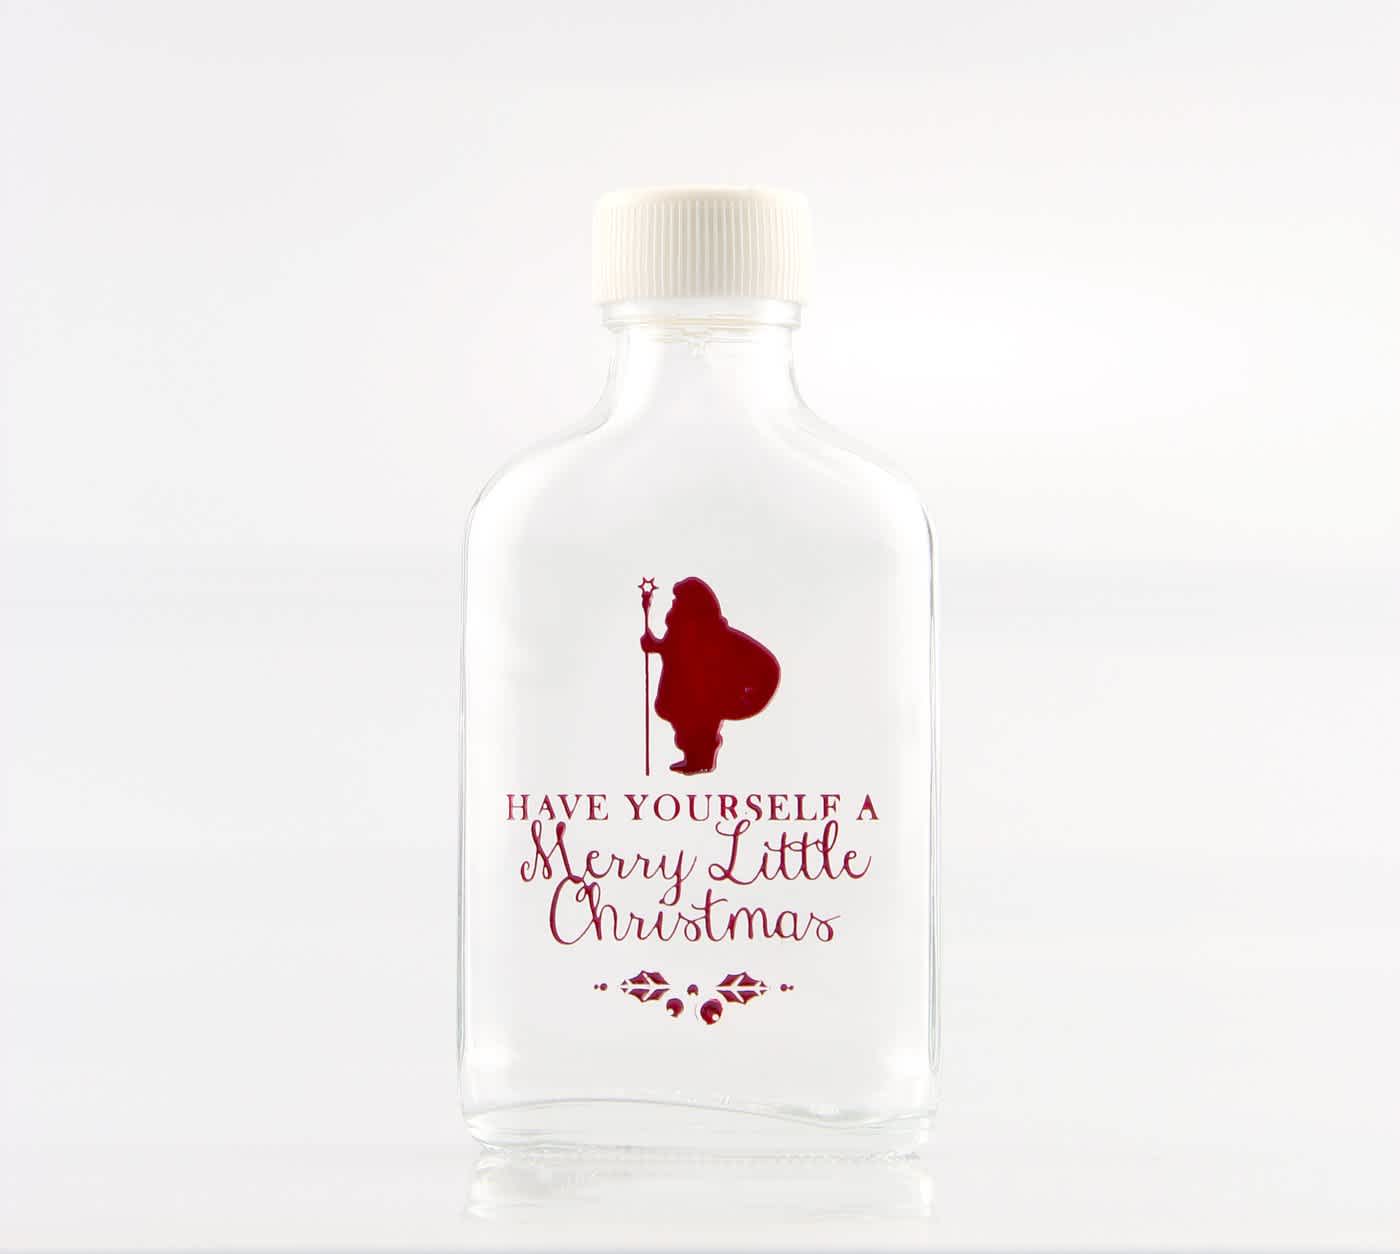 Have Yourself a Merry Little Christmas small etched glass bottle